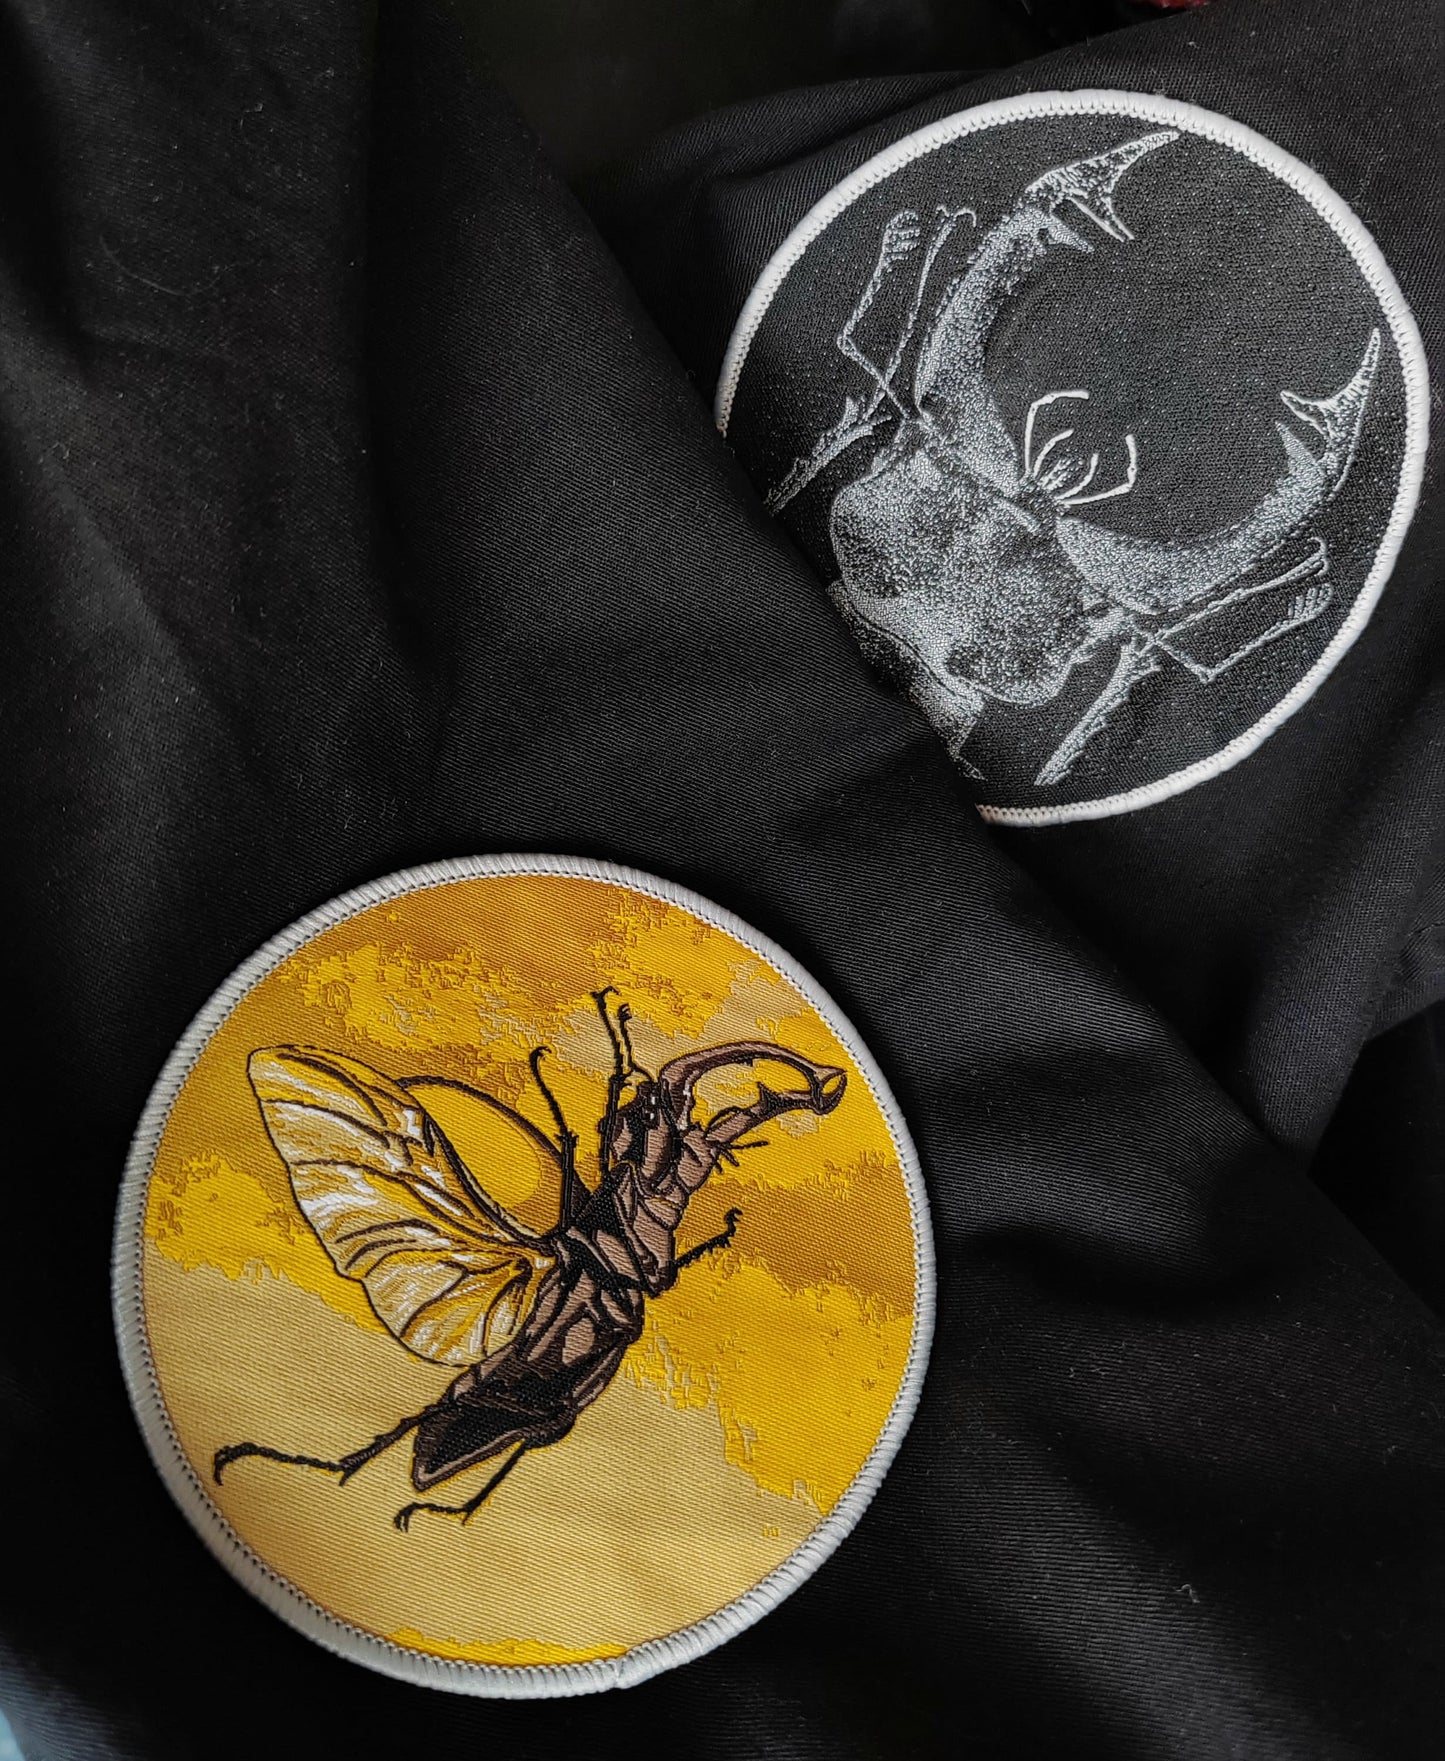 Sew on patch - Billywitch, Flying Stag Beetle (Lucanus cervus)